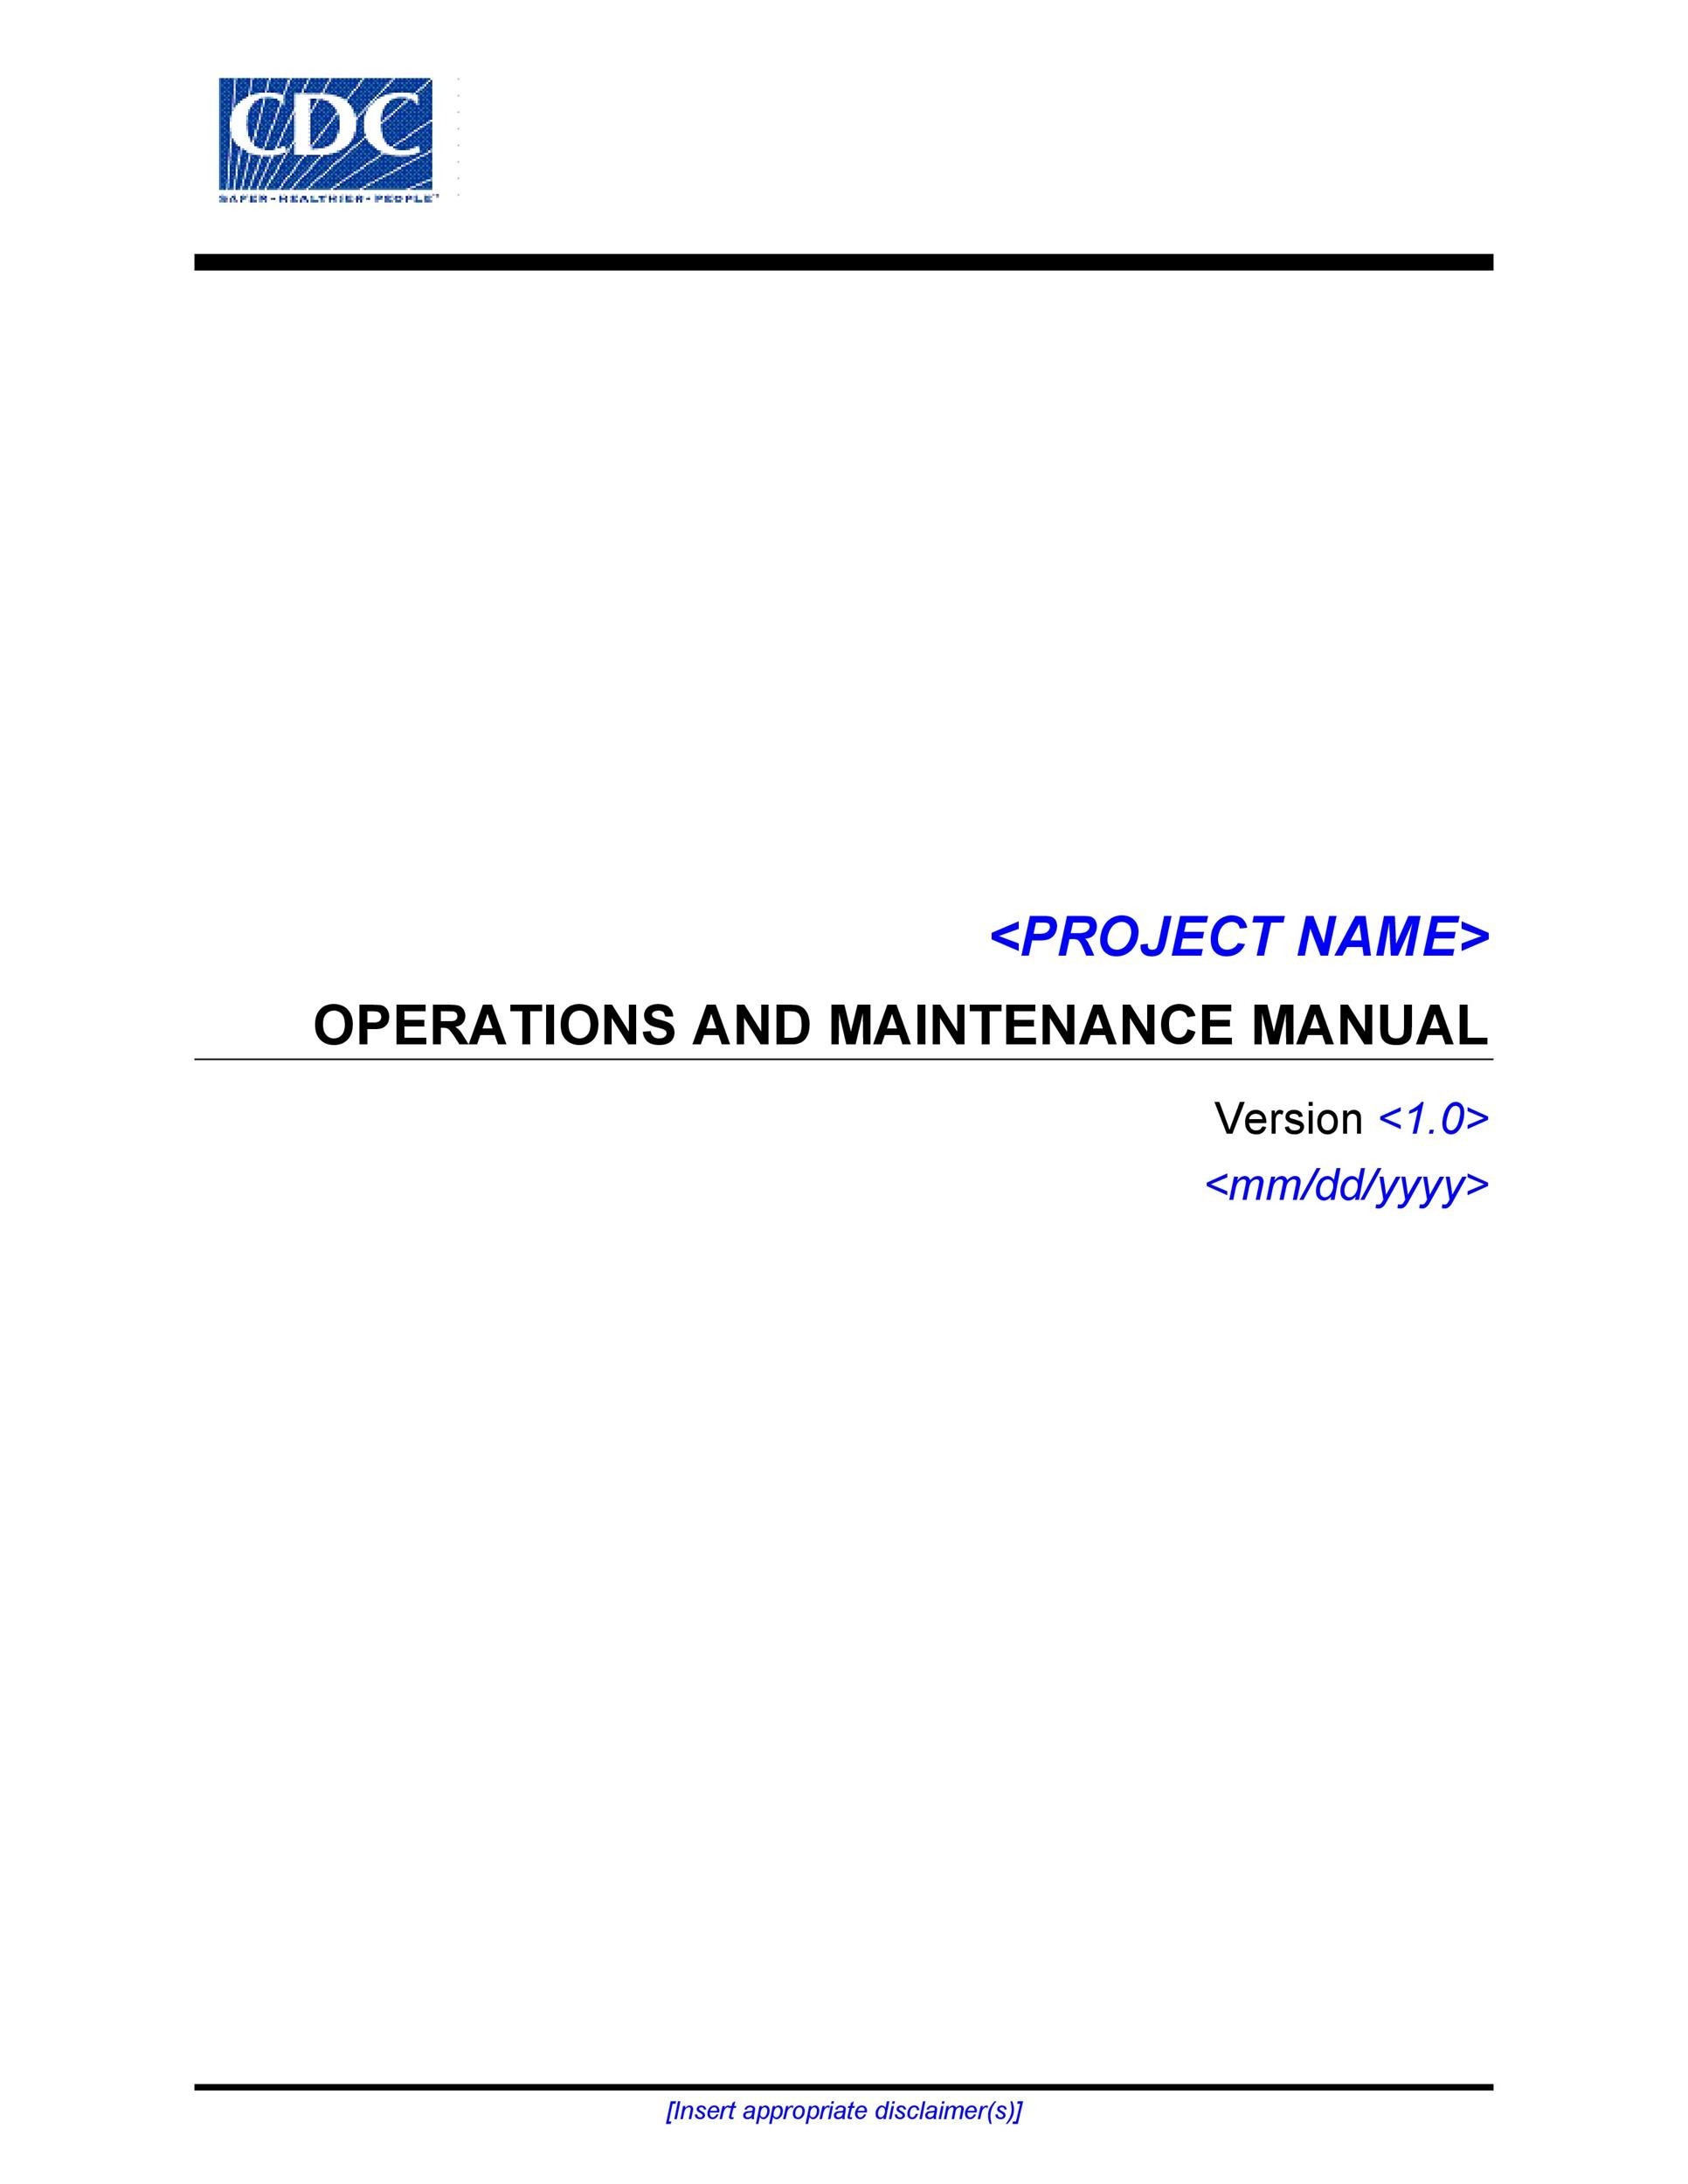 Free instruction manual template 21